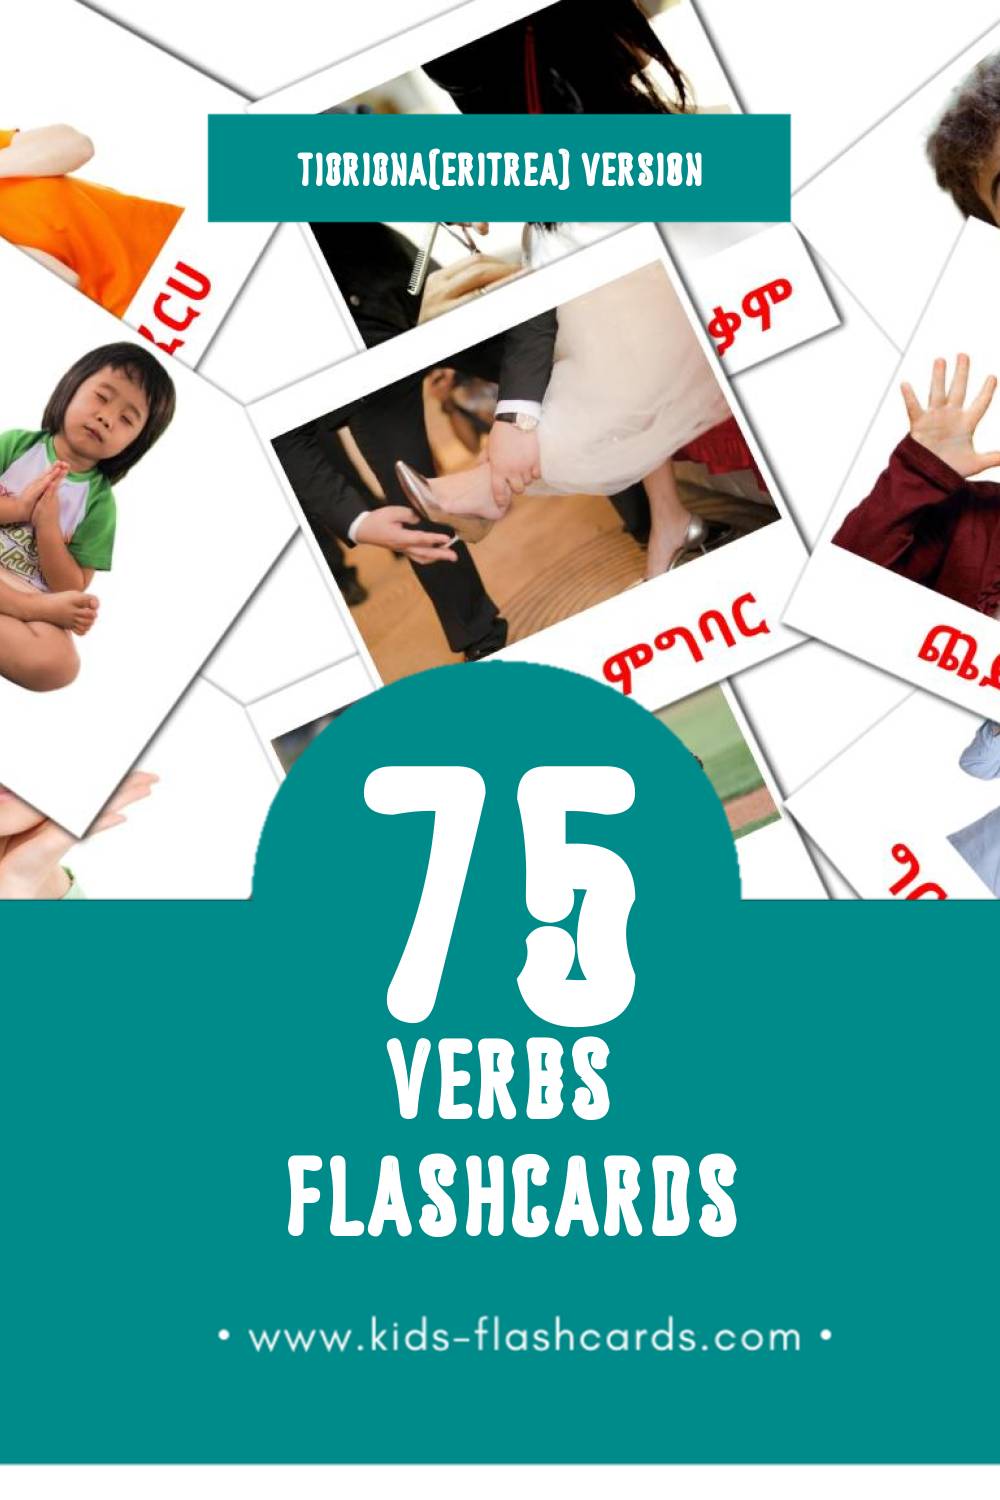 Visual ግሲ Flashcards for Toddlers (78 cards in Tigrigna(Eritrea))